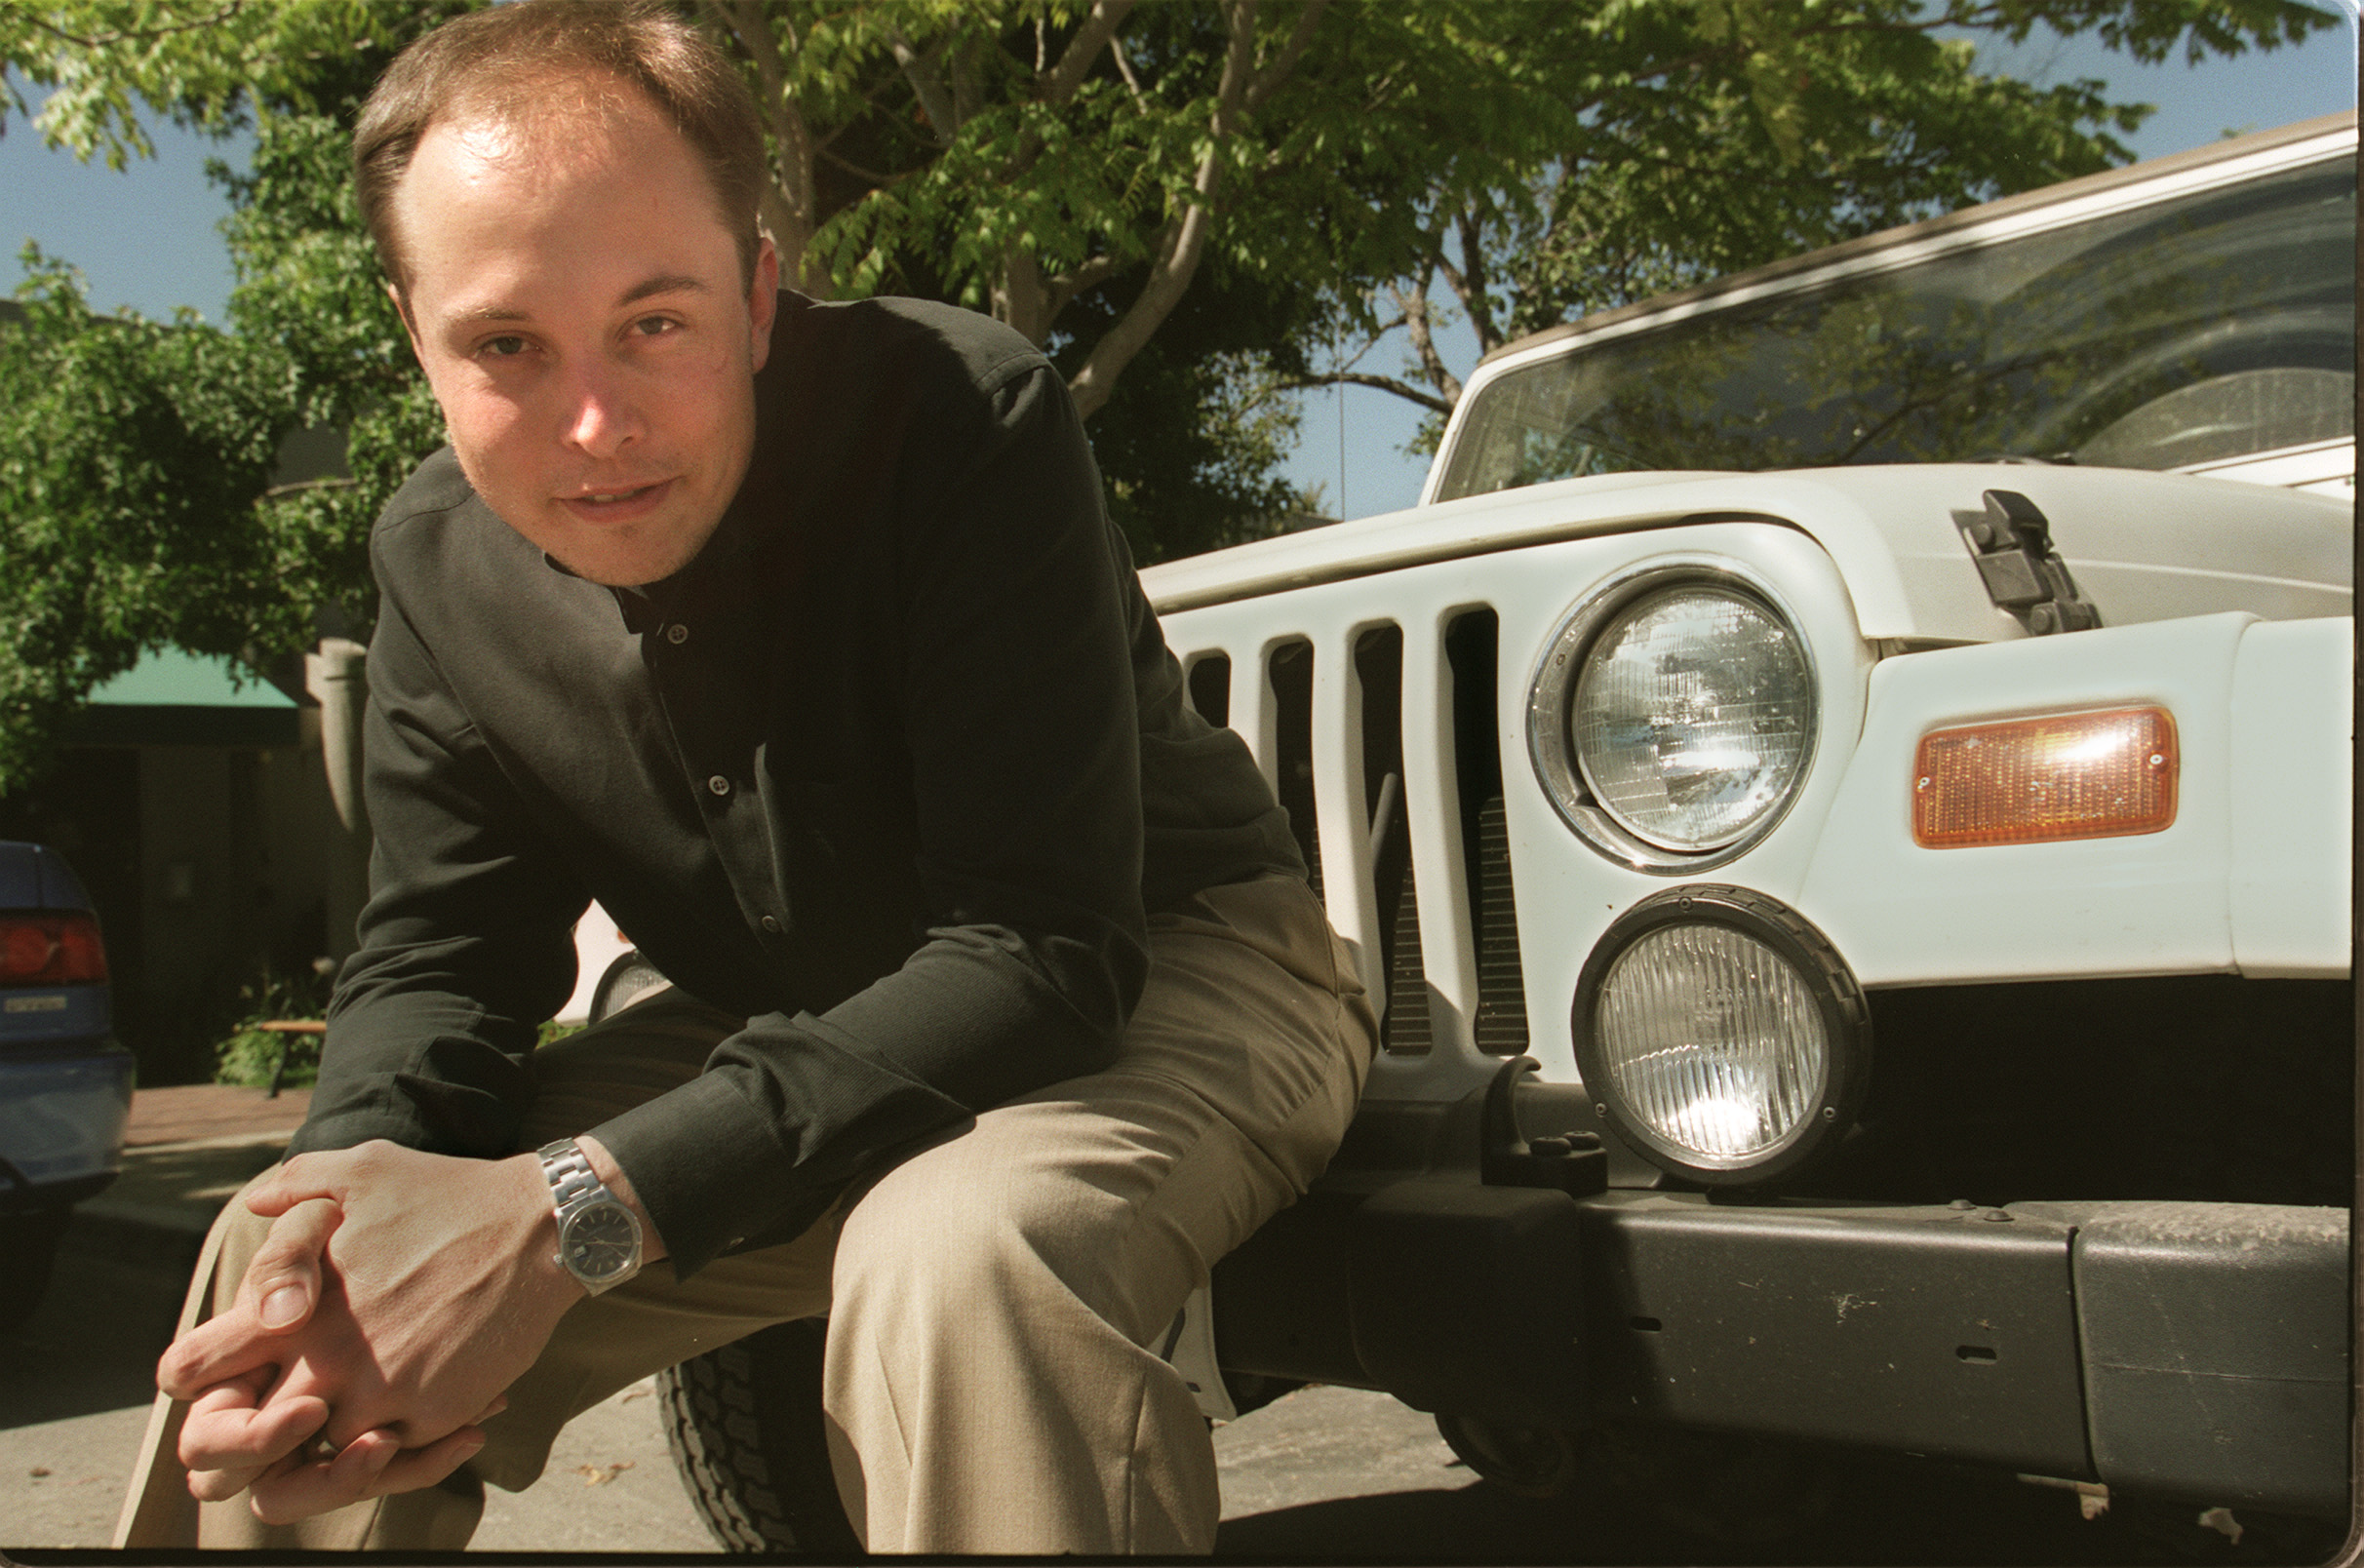 A portrait of Elon Musk on August 7, 2000, in Palo Alto, California. | Source: Getty Images